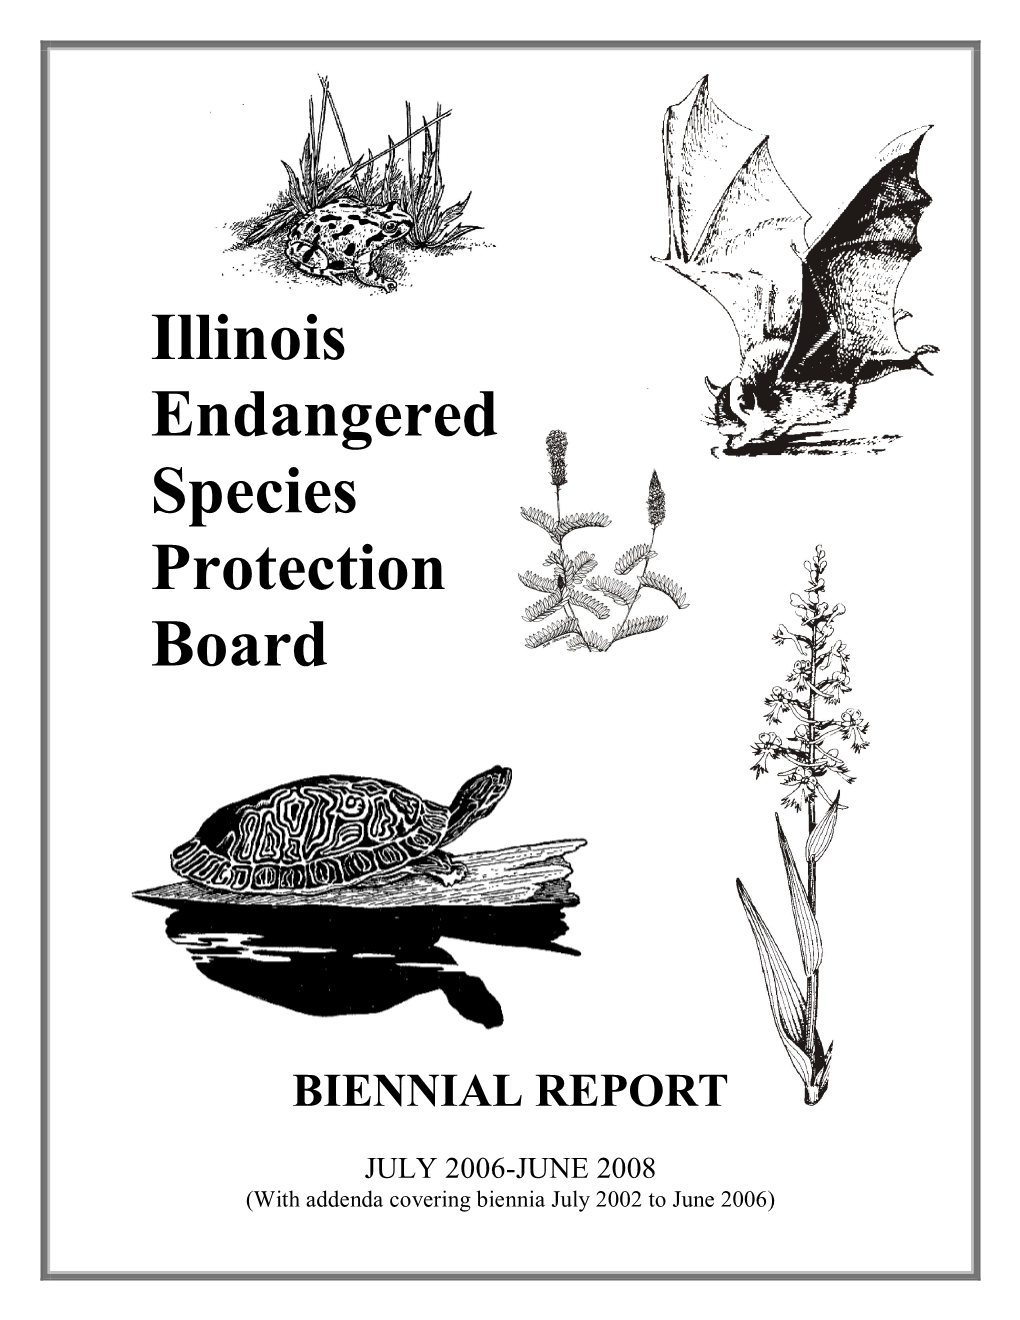 Illinois Endangered Species Protection Board